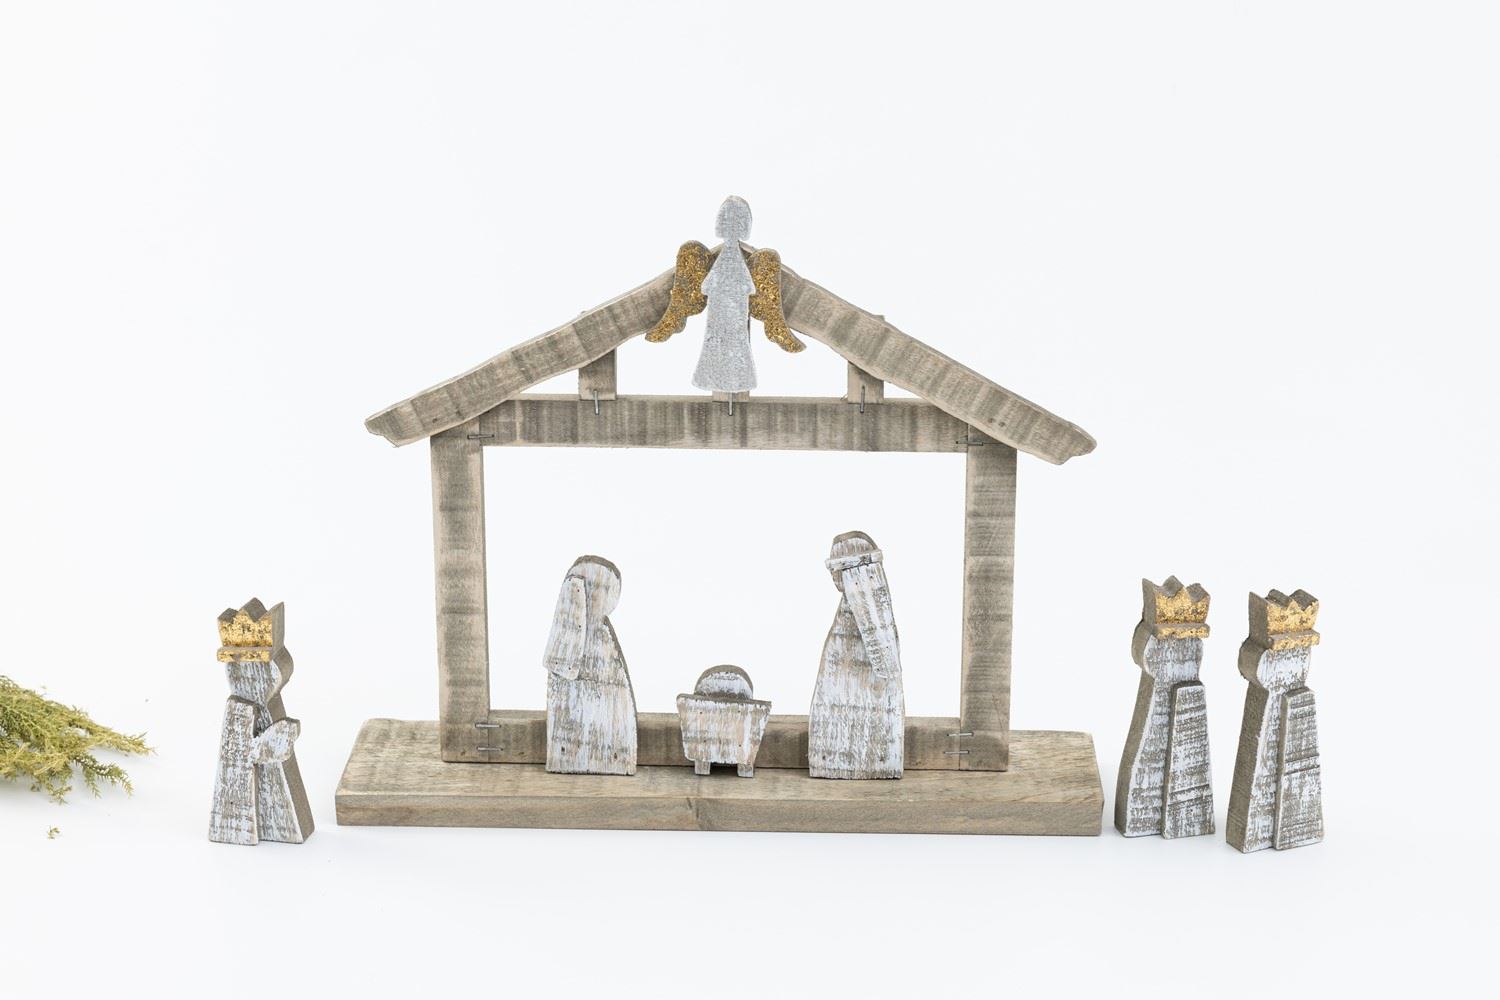 12.5x10.5" Wood Nativity Tabletop, Tricolor